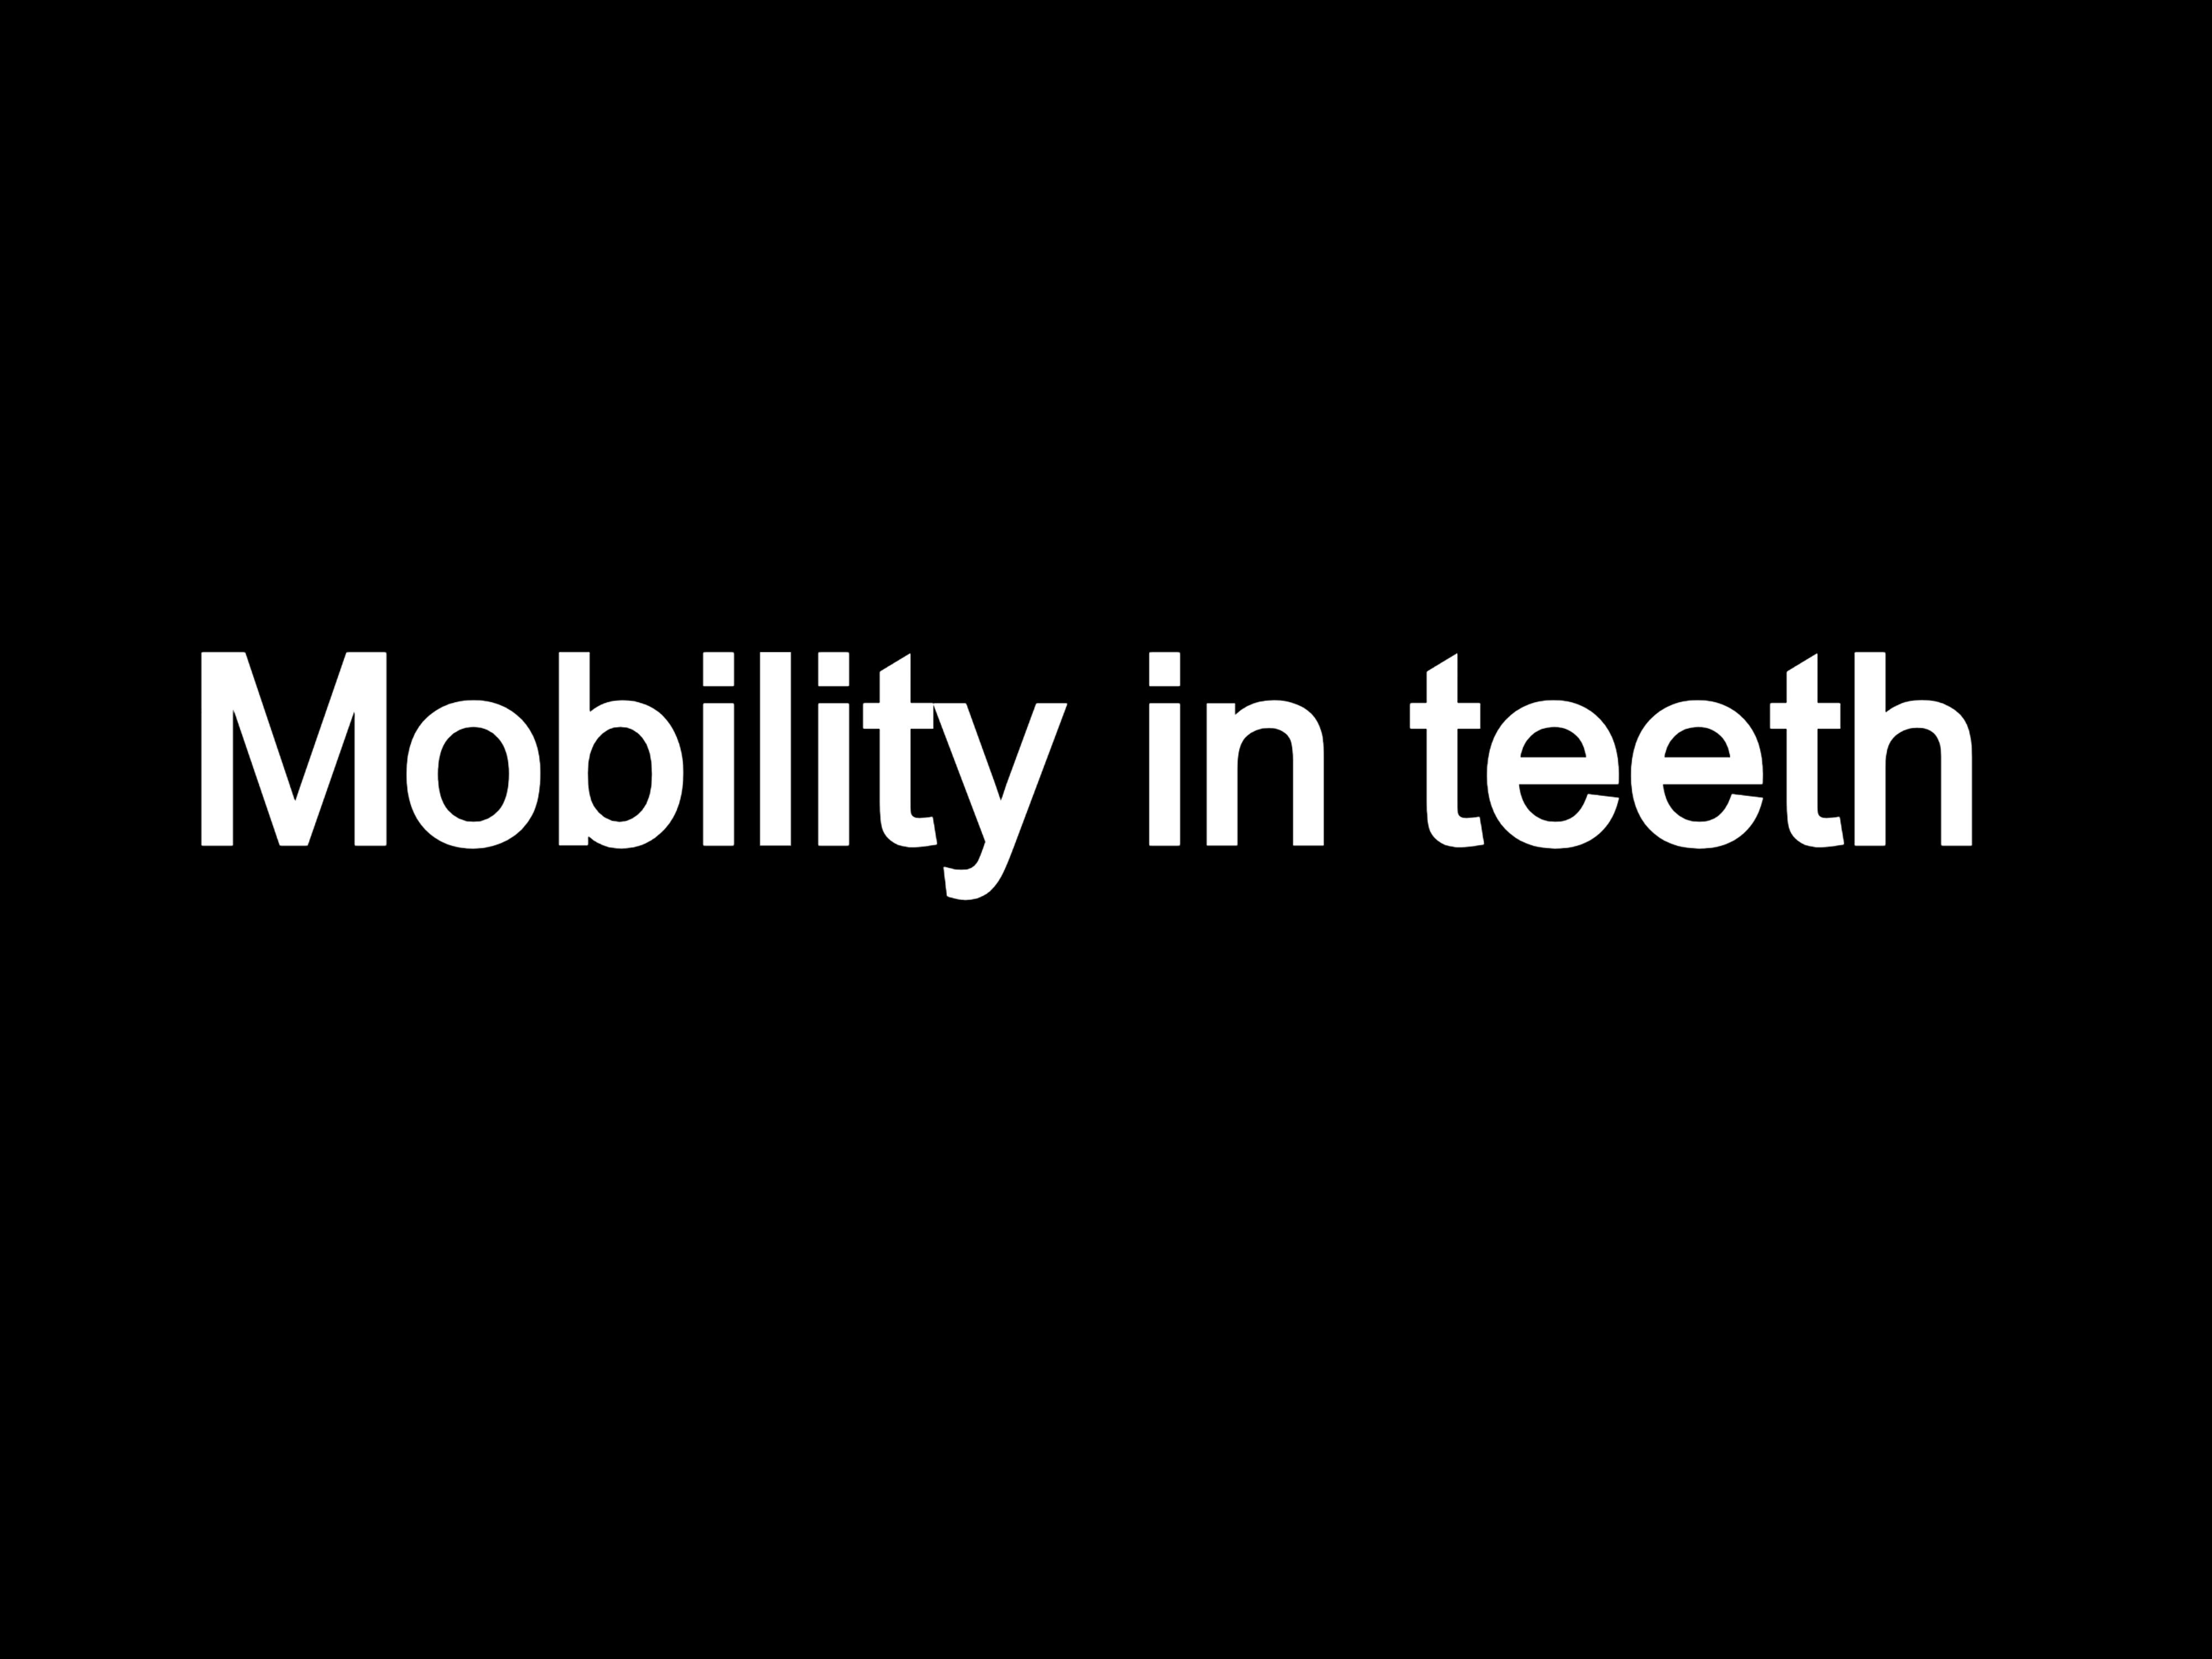 Mobility in teeth